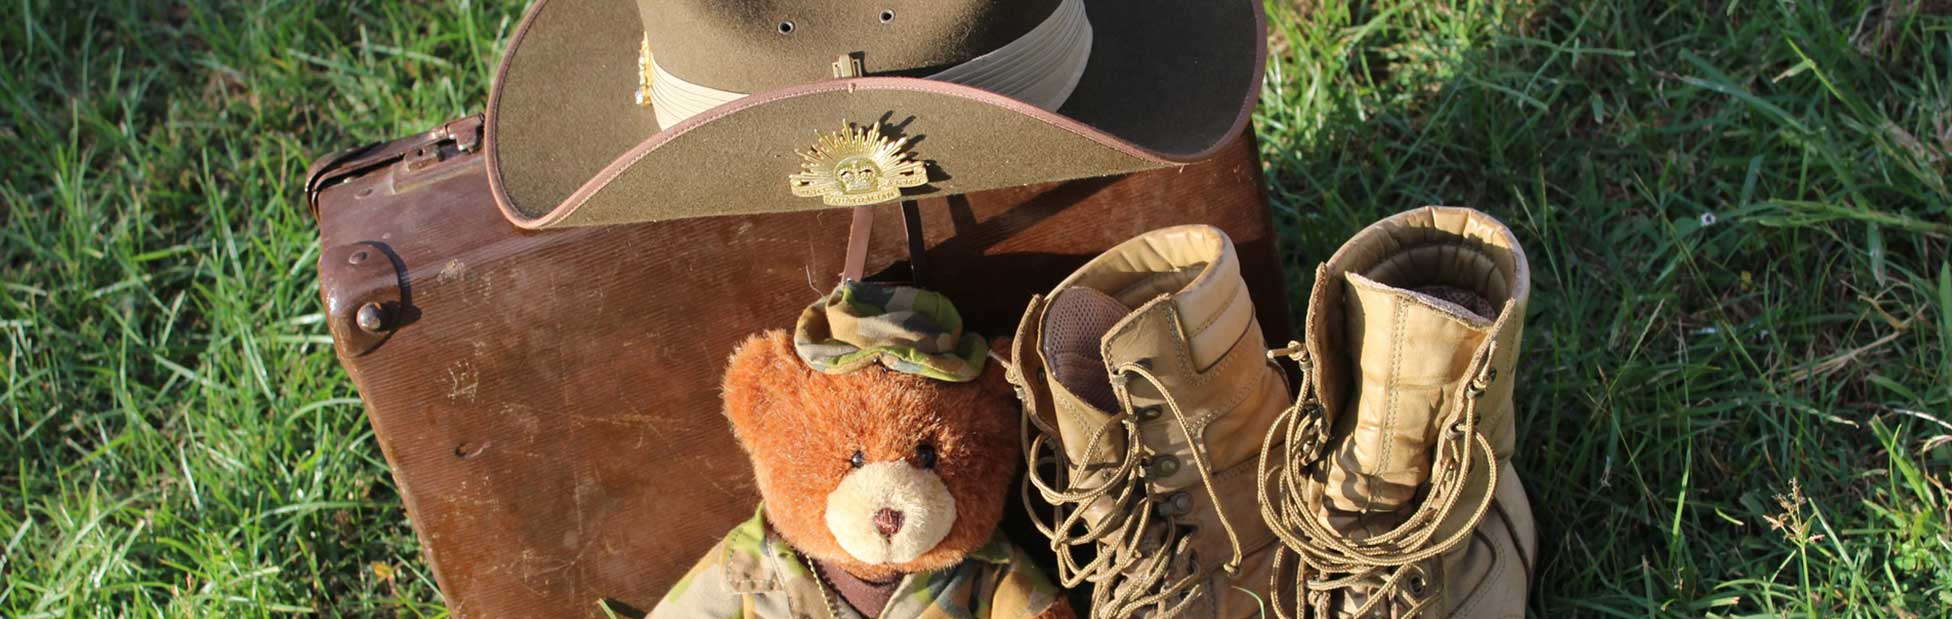 Army hat, boots and bear